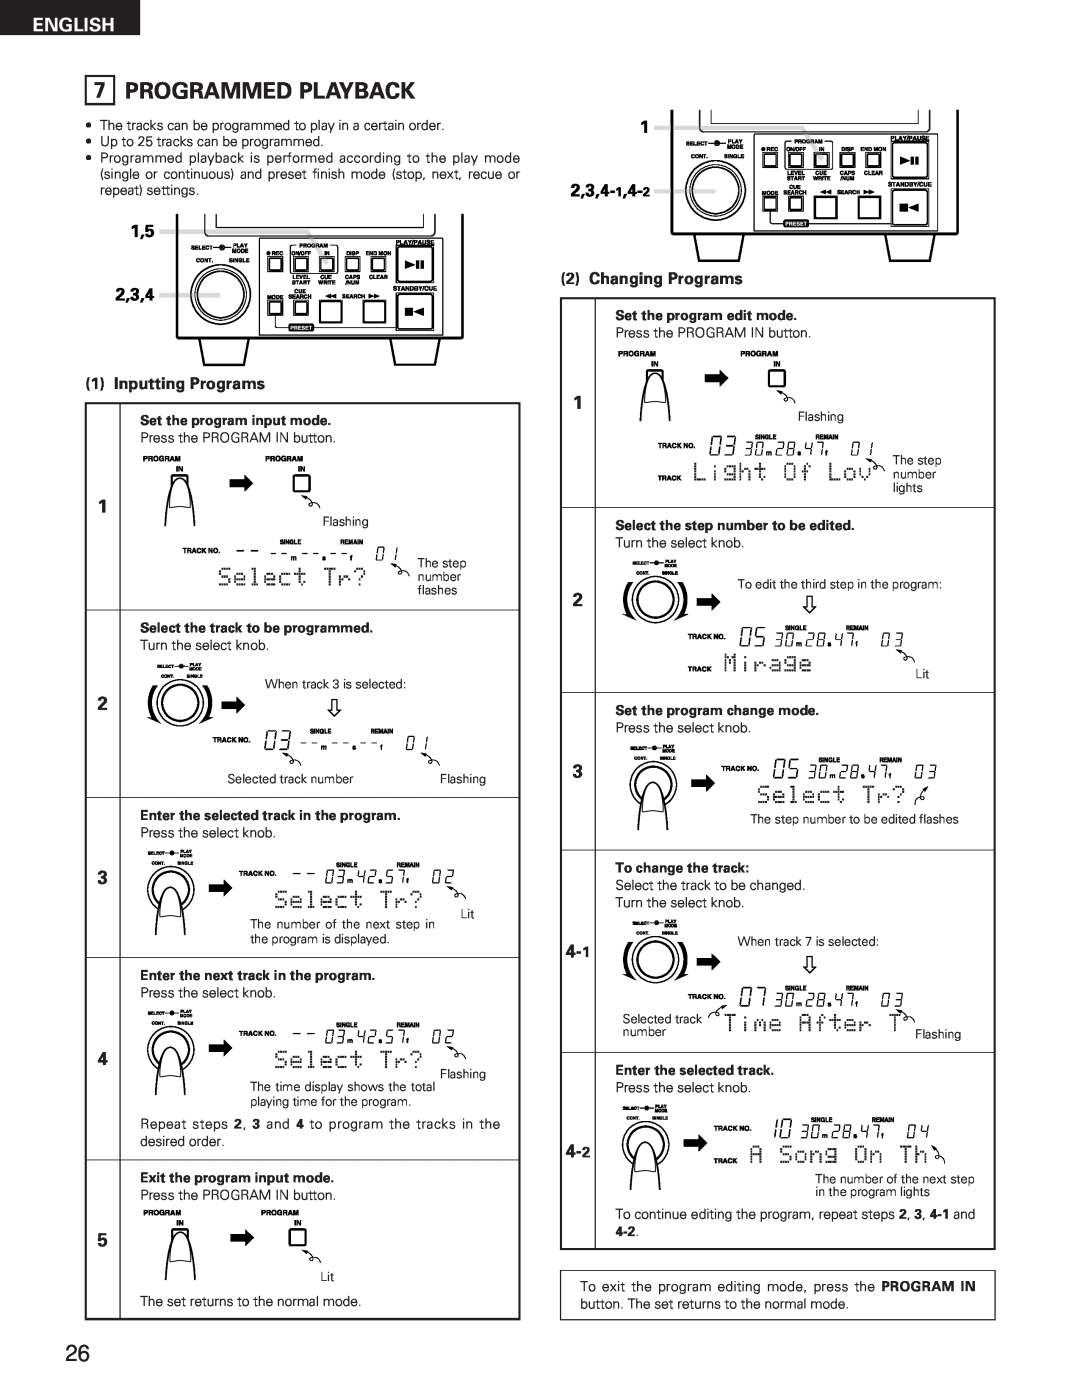 Denon DN-M991R operating instructions 7PROGRAMMED PLAYBACK, English, Inputting Programs, Changing Programs 